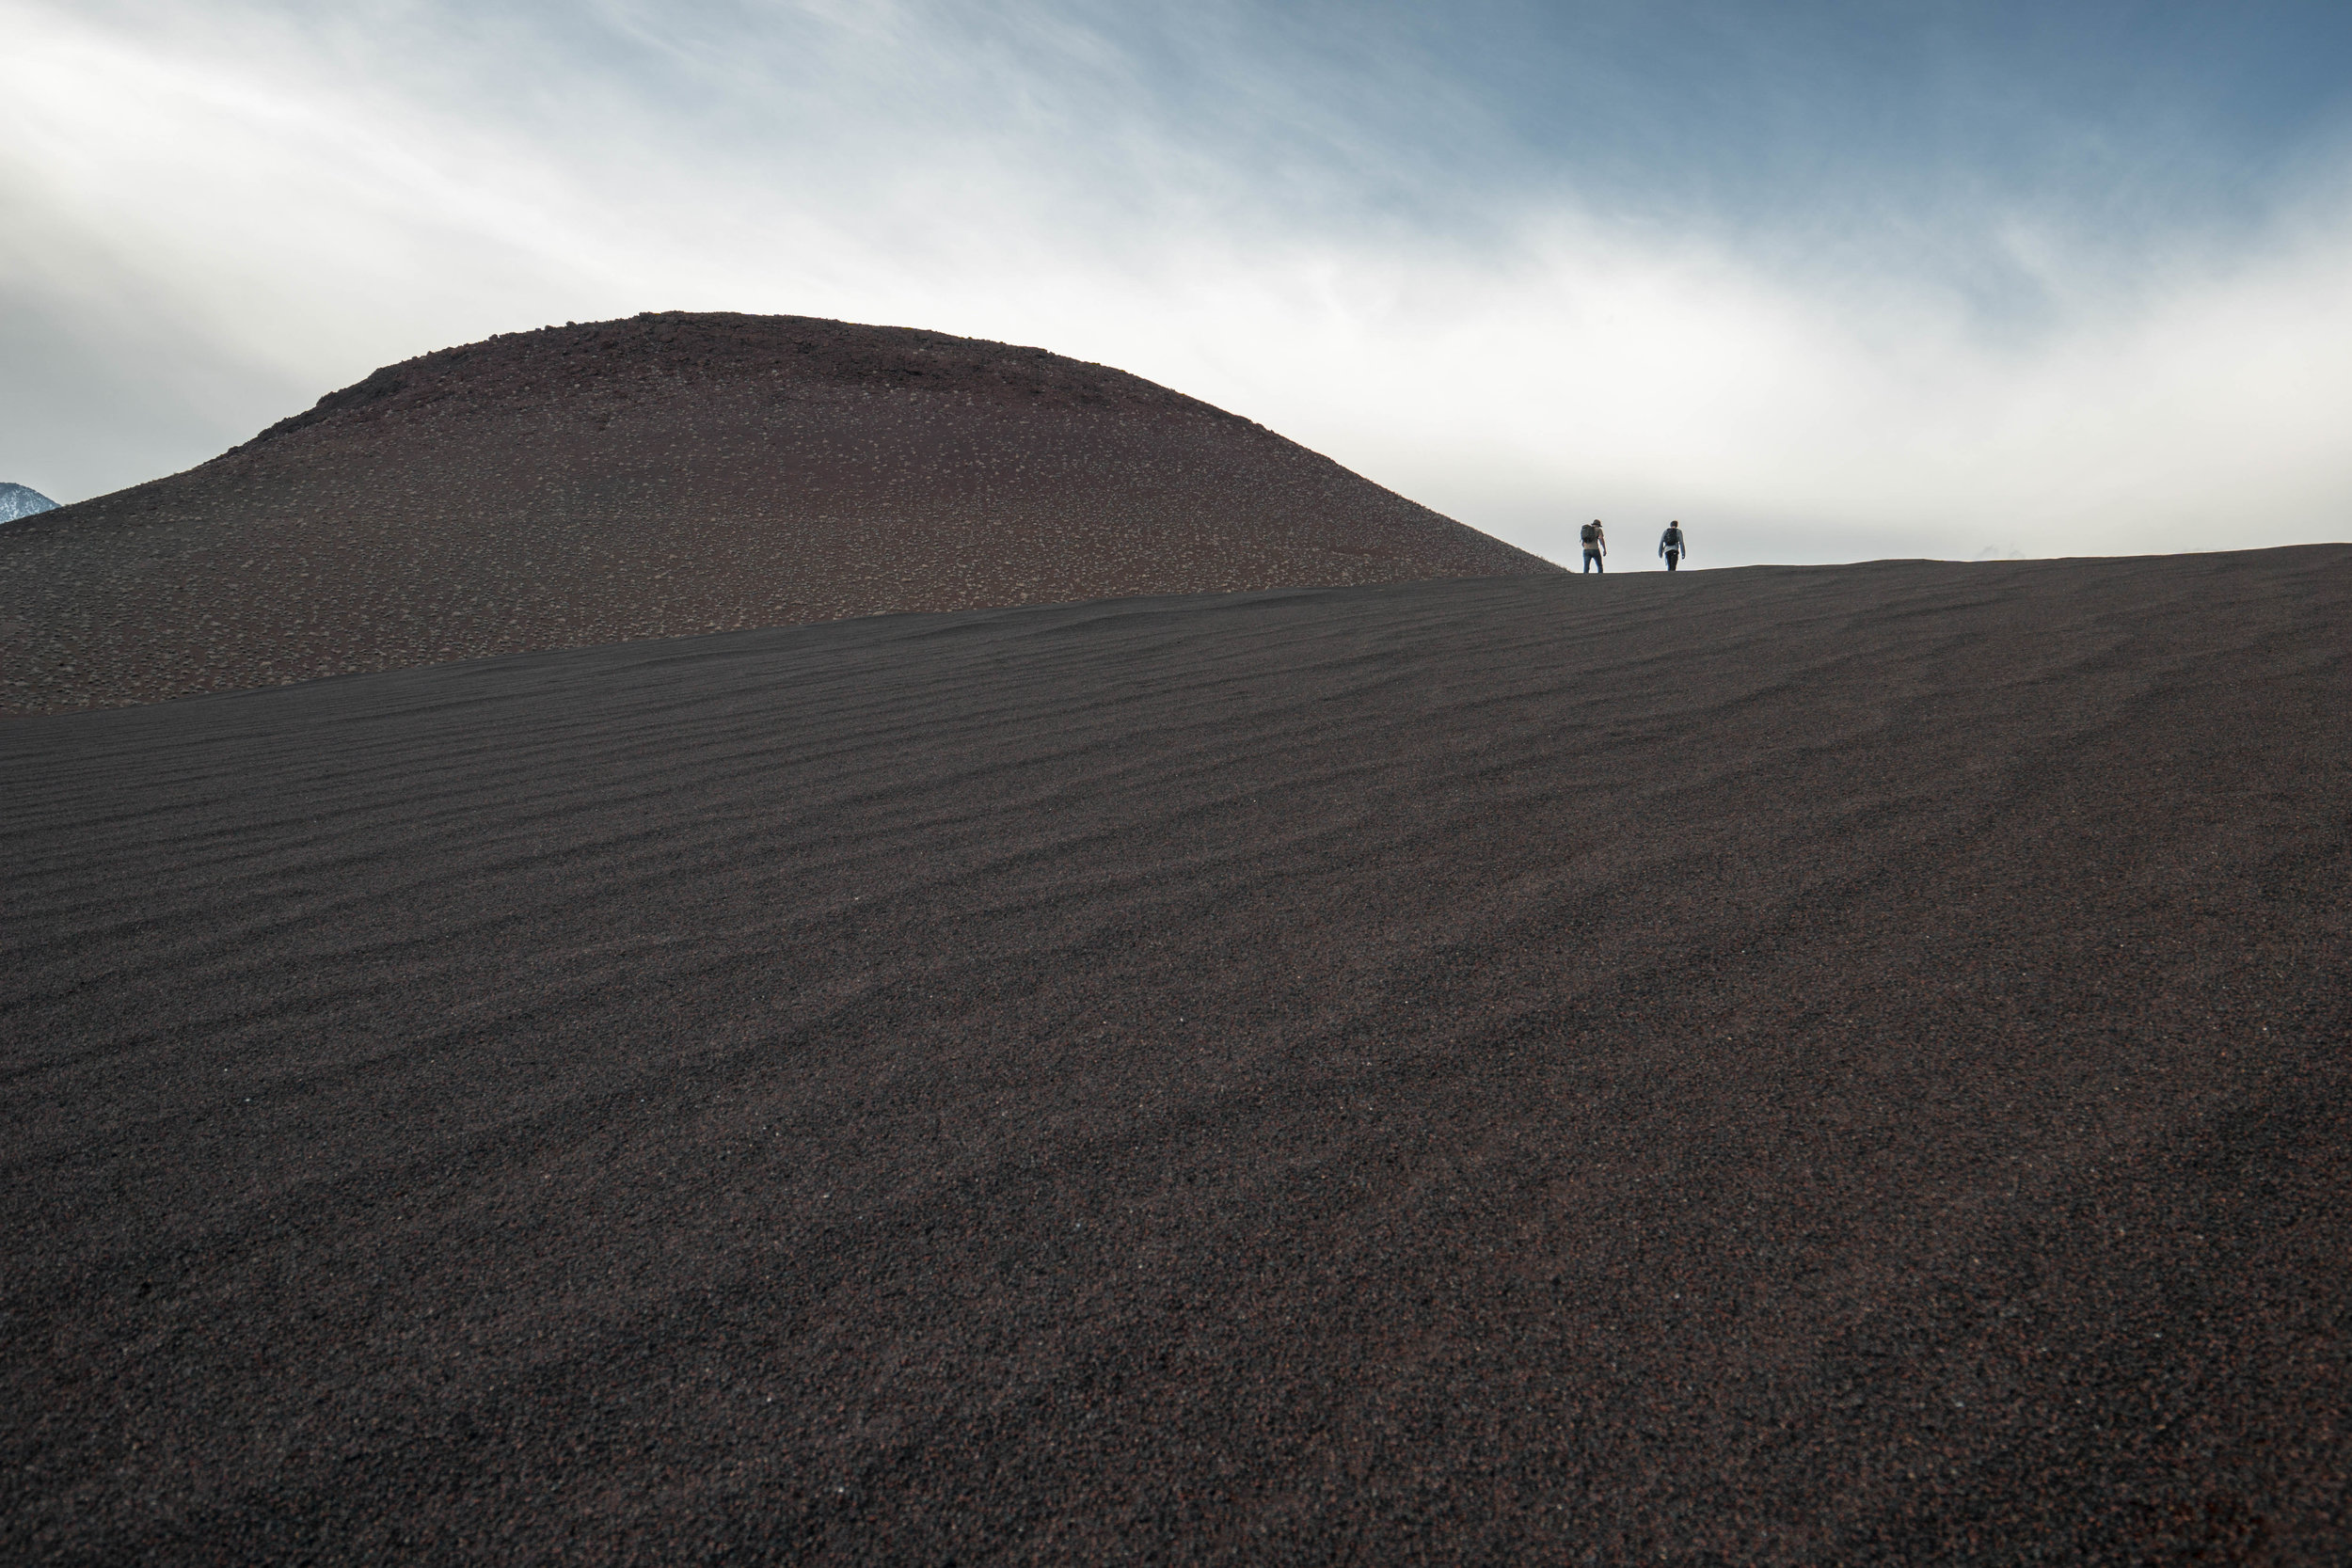 The wind-swept sand dunes shift from a scarlet red to a mystifying blackened hue.